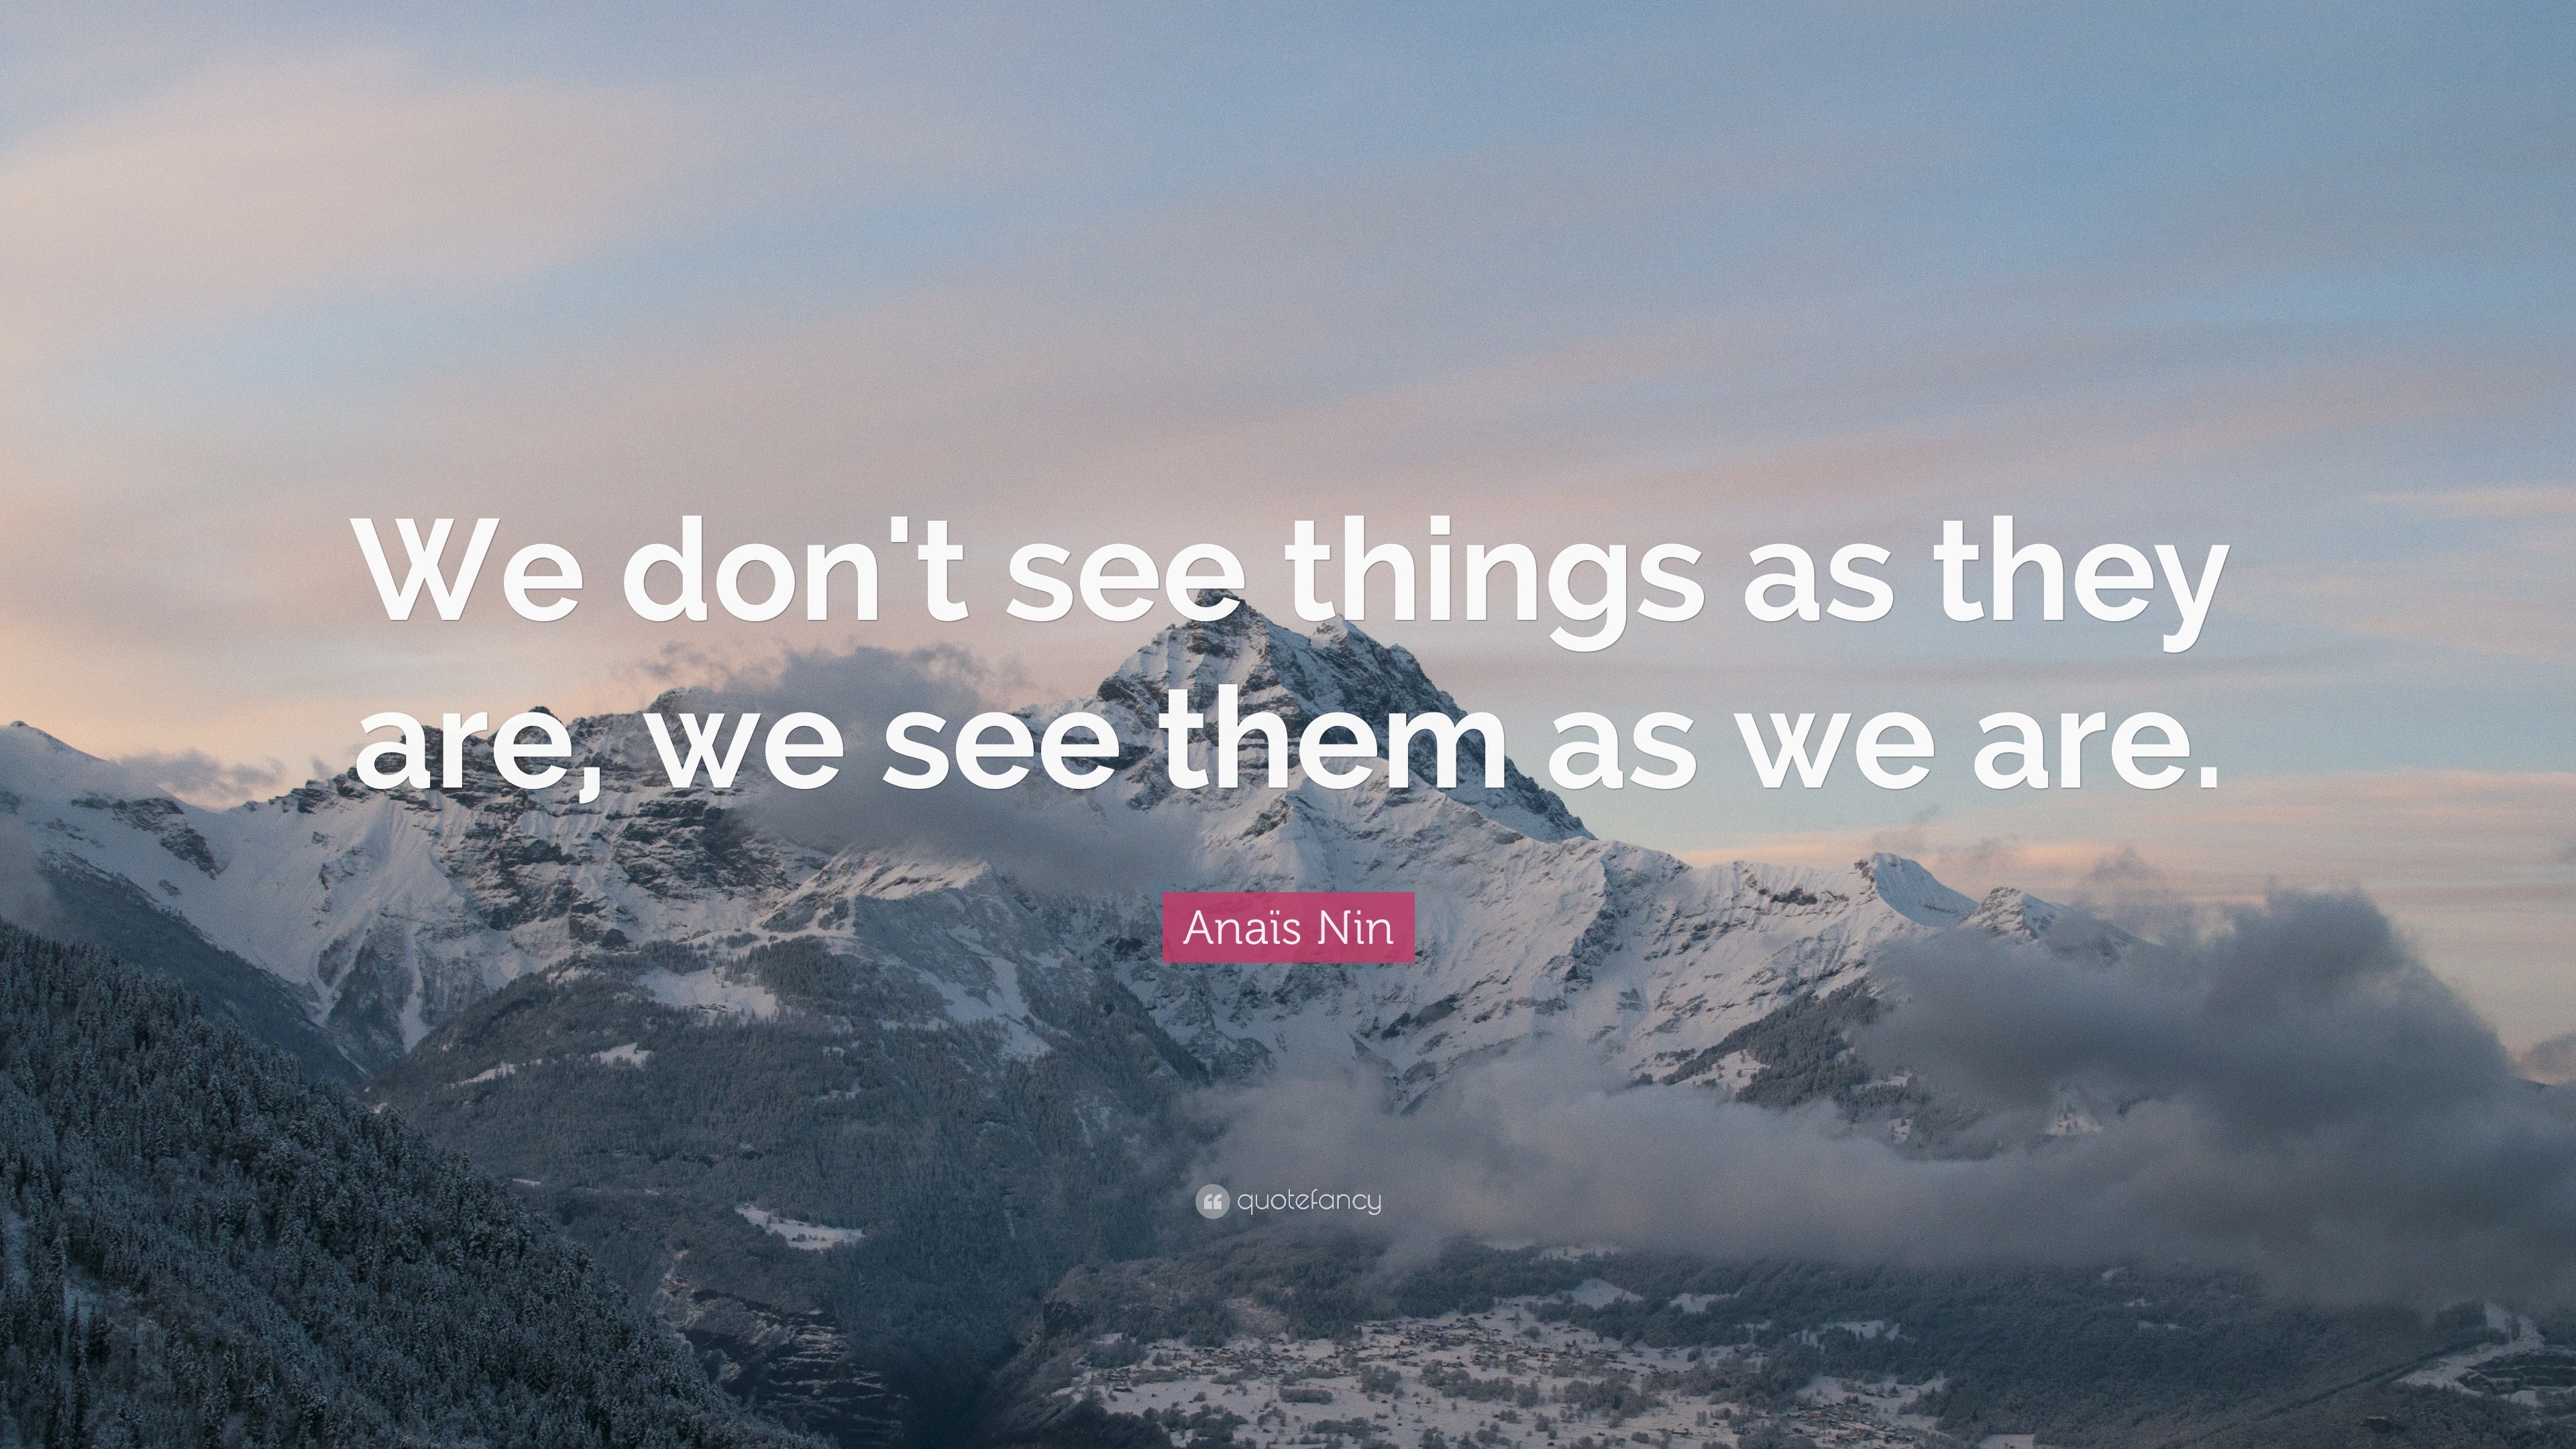 25442-Ana-s-Nin-Quote-We-don-t-see-things-as-they-are-we-see-them-as-we.jpg